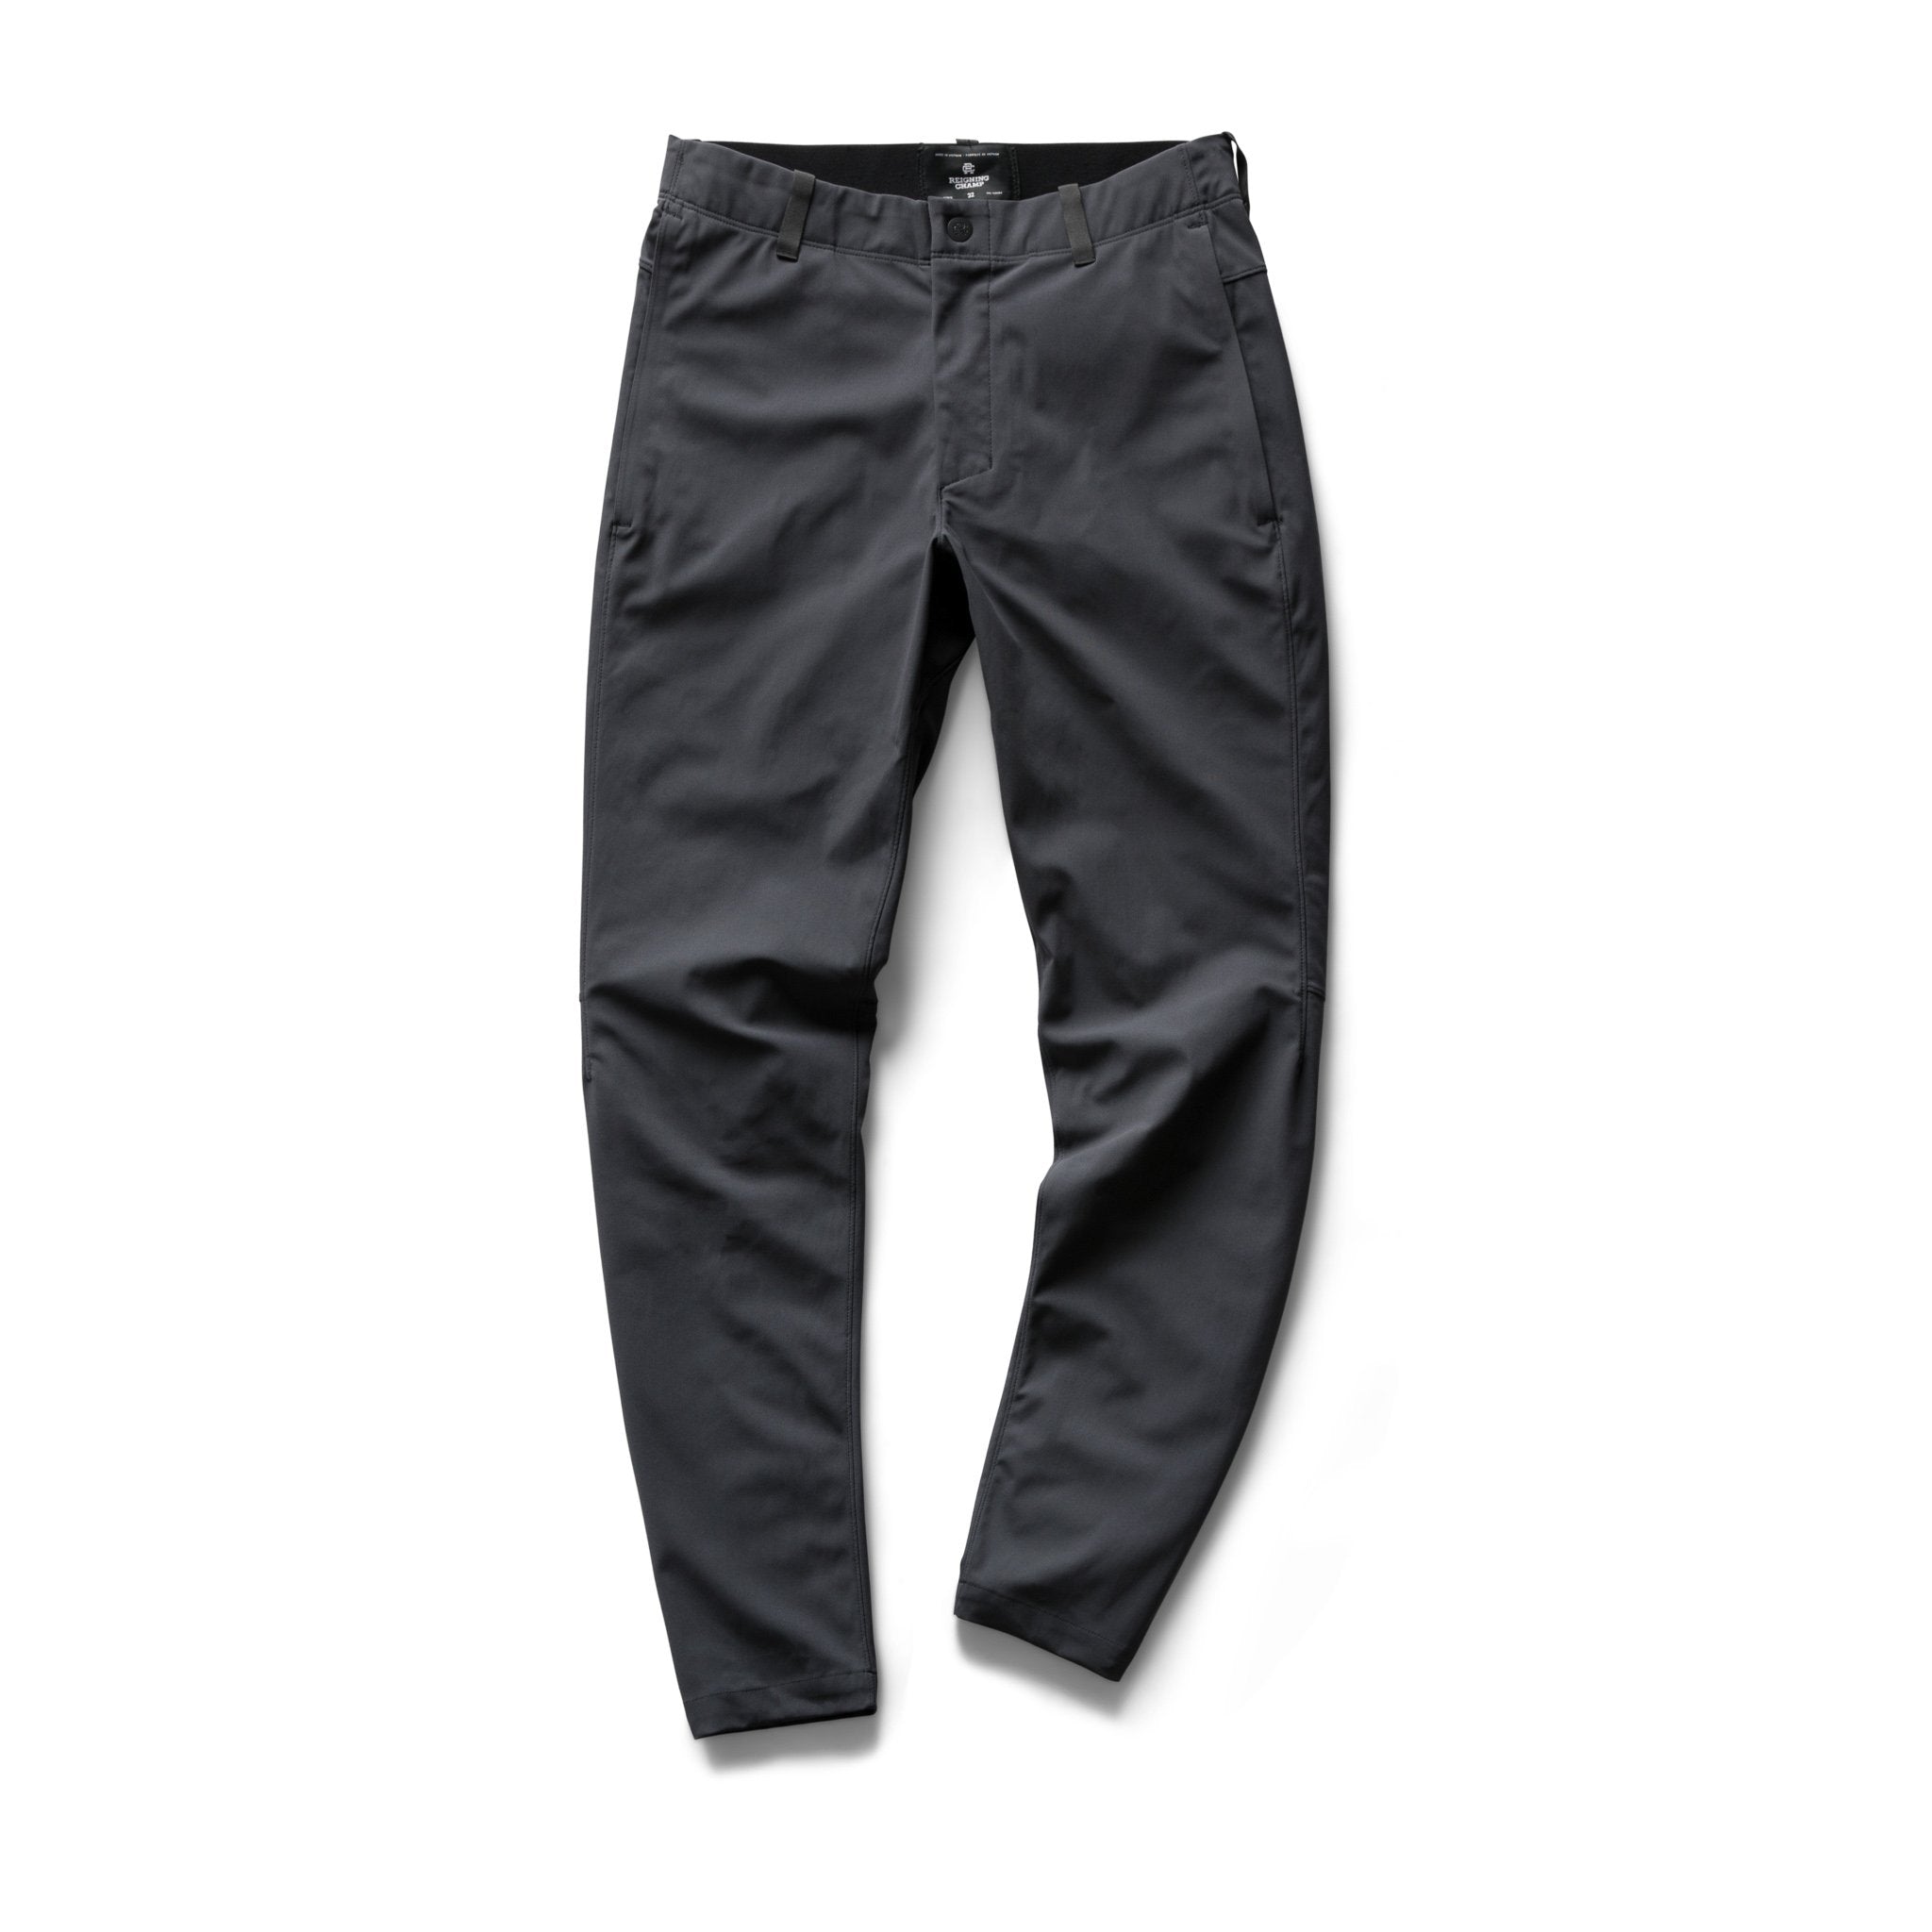 【Reigning Champ】Coach's Pant | Reigning Champ JP